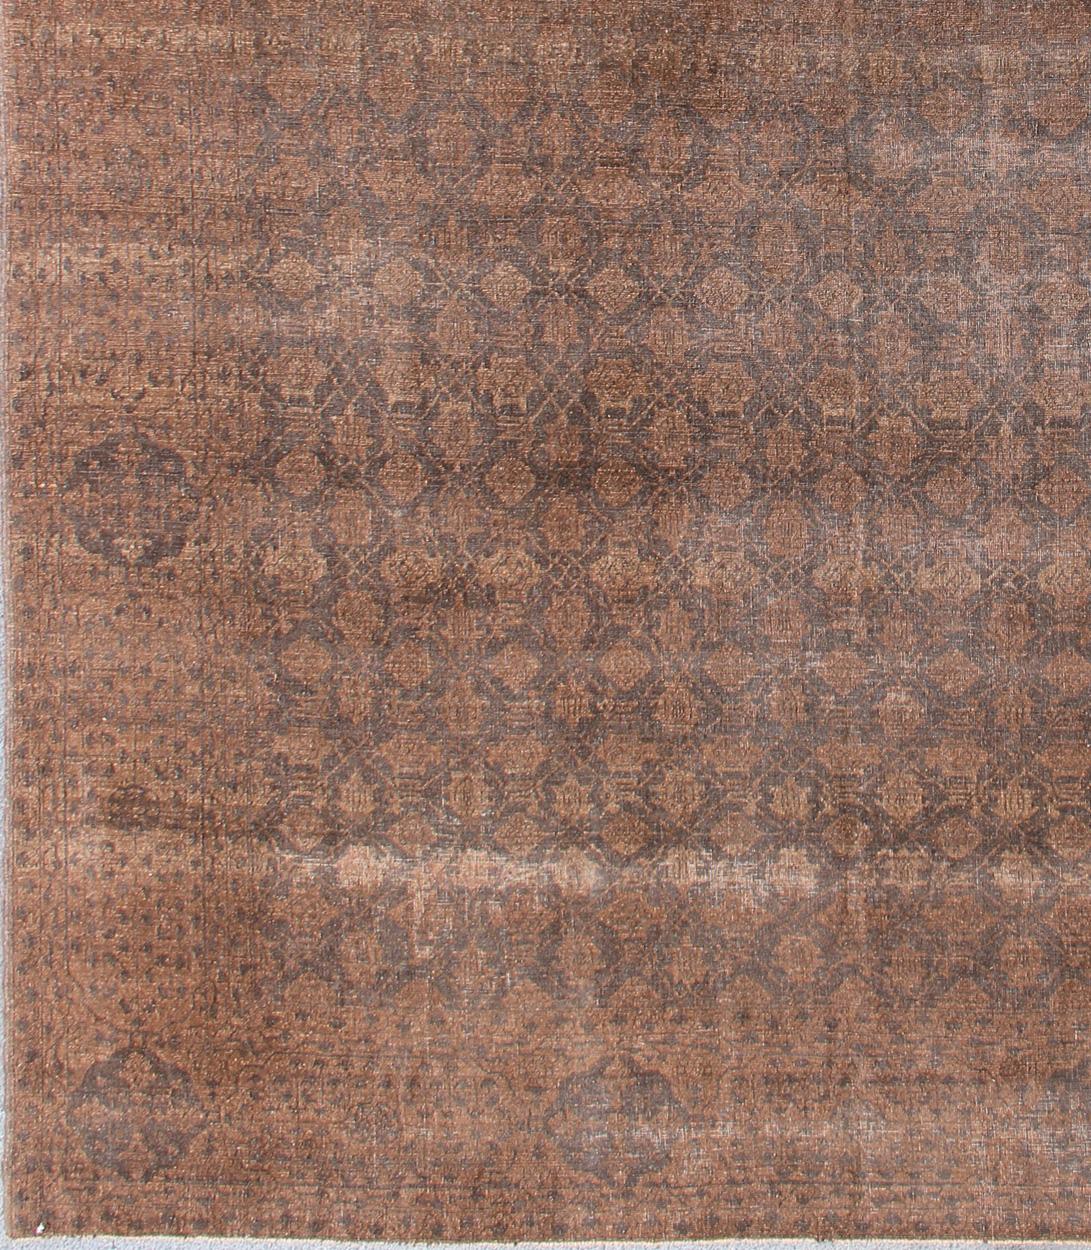 Dark chocolate brown and charcoal vintage Turkish rug ottoman, rug 19-0817, country of origin / type: Turkey / Ottoman

This ottoman design rug from Turkey is finely woven and features an all-over design of various brown highlights and